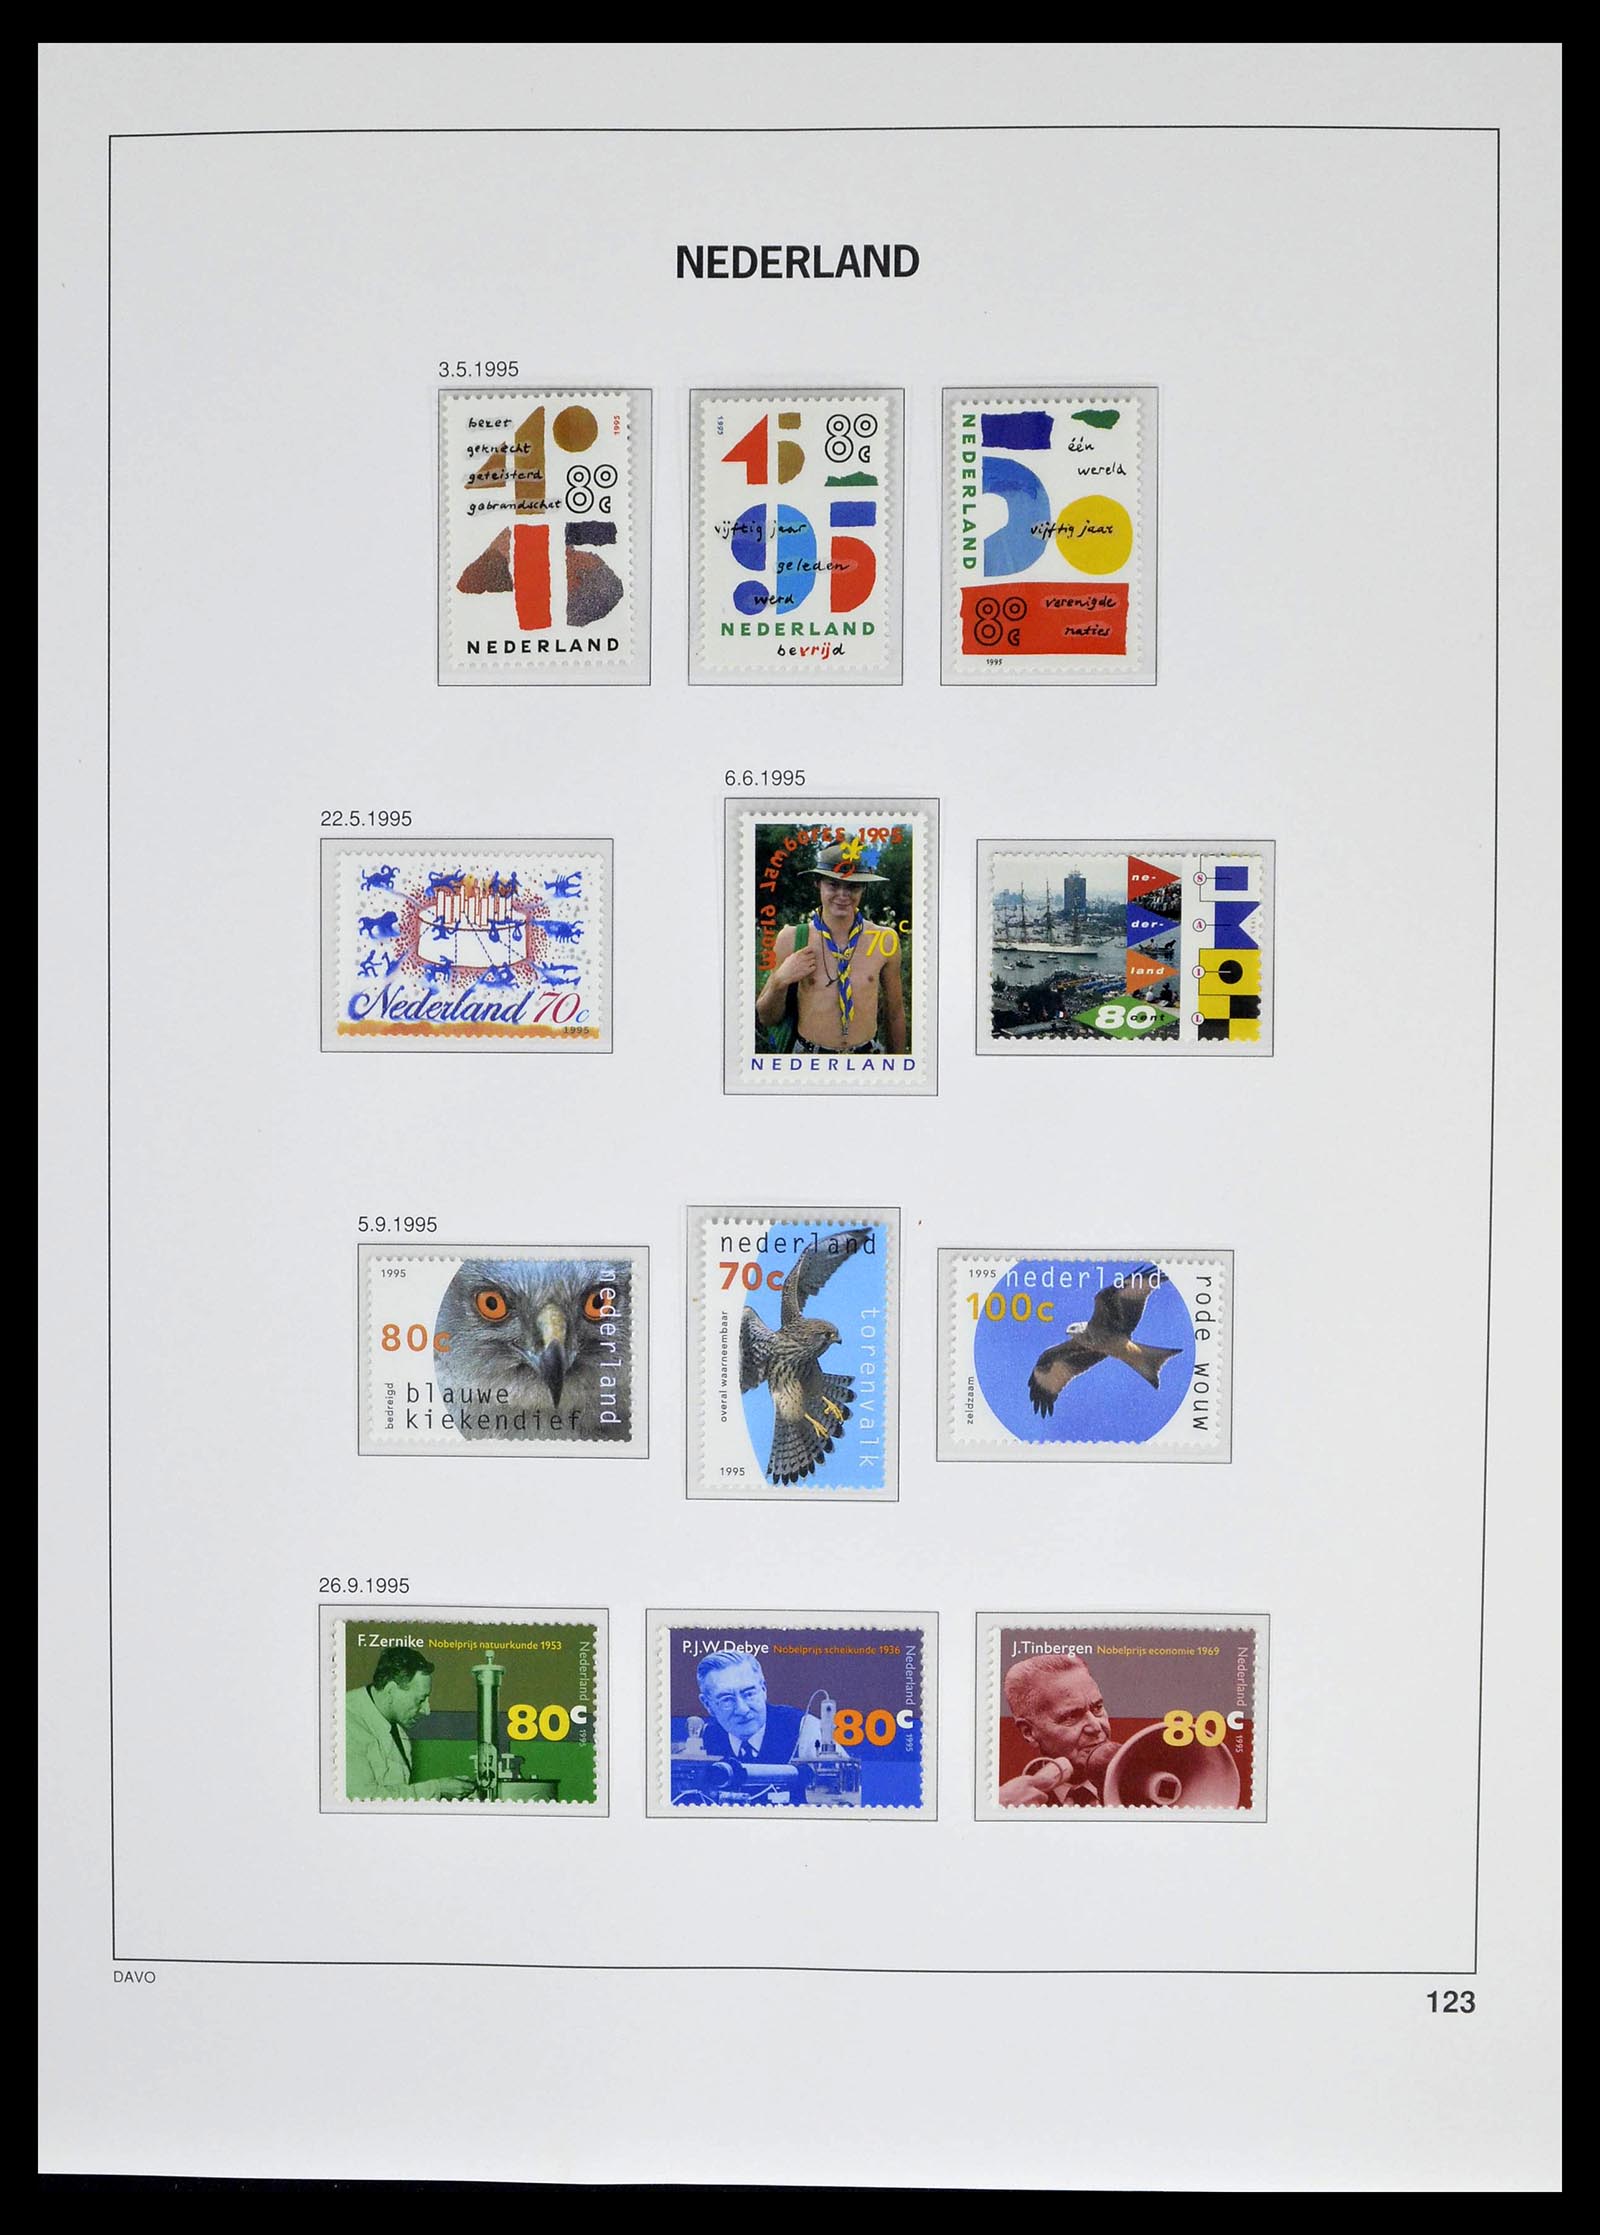 39136 0078 - Stamp collection 39136 Netherlands 1975-2020!